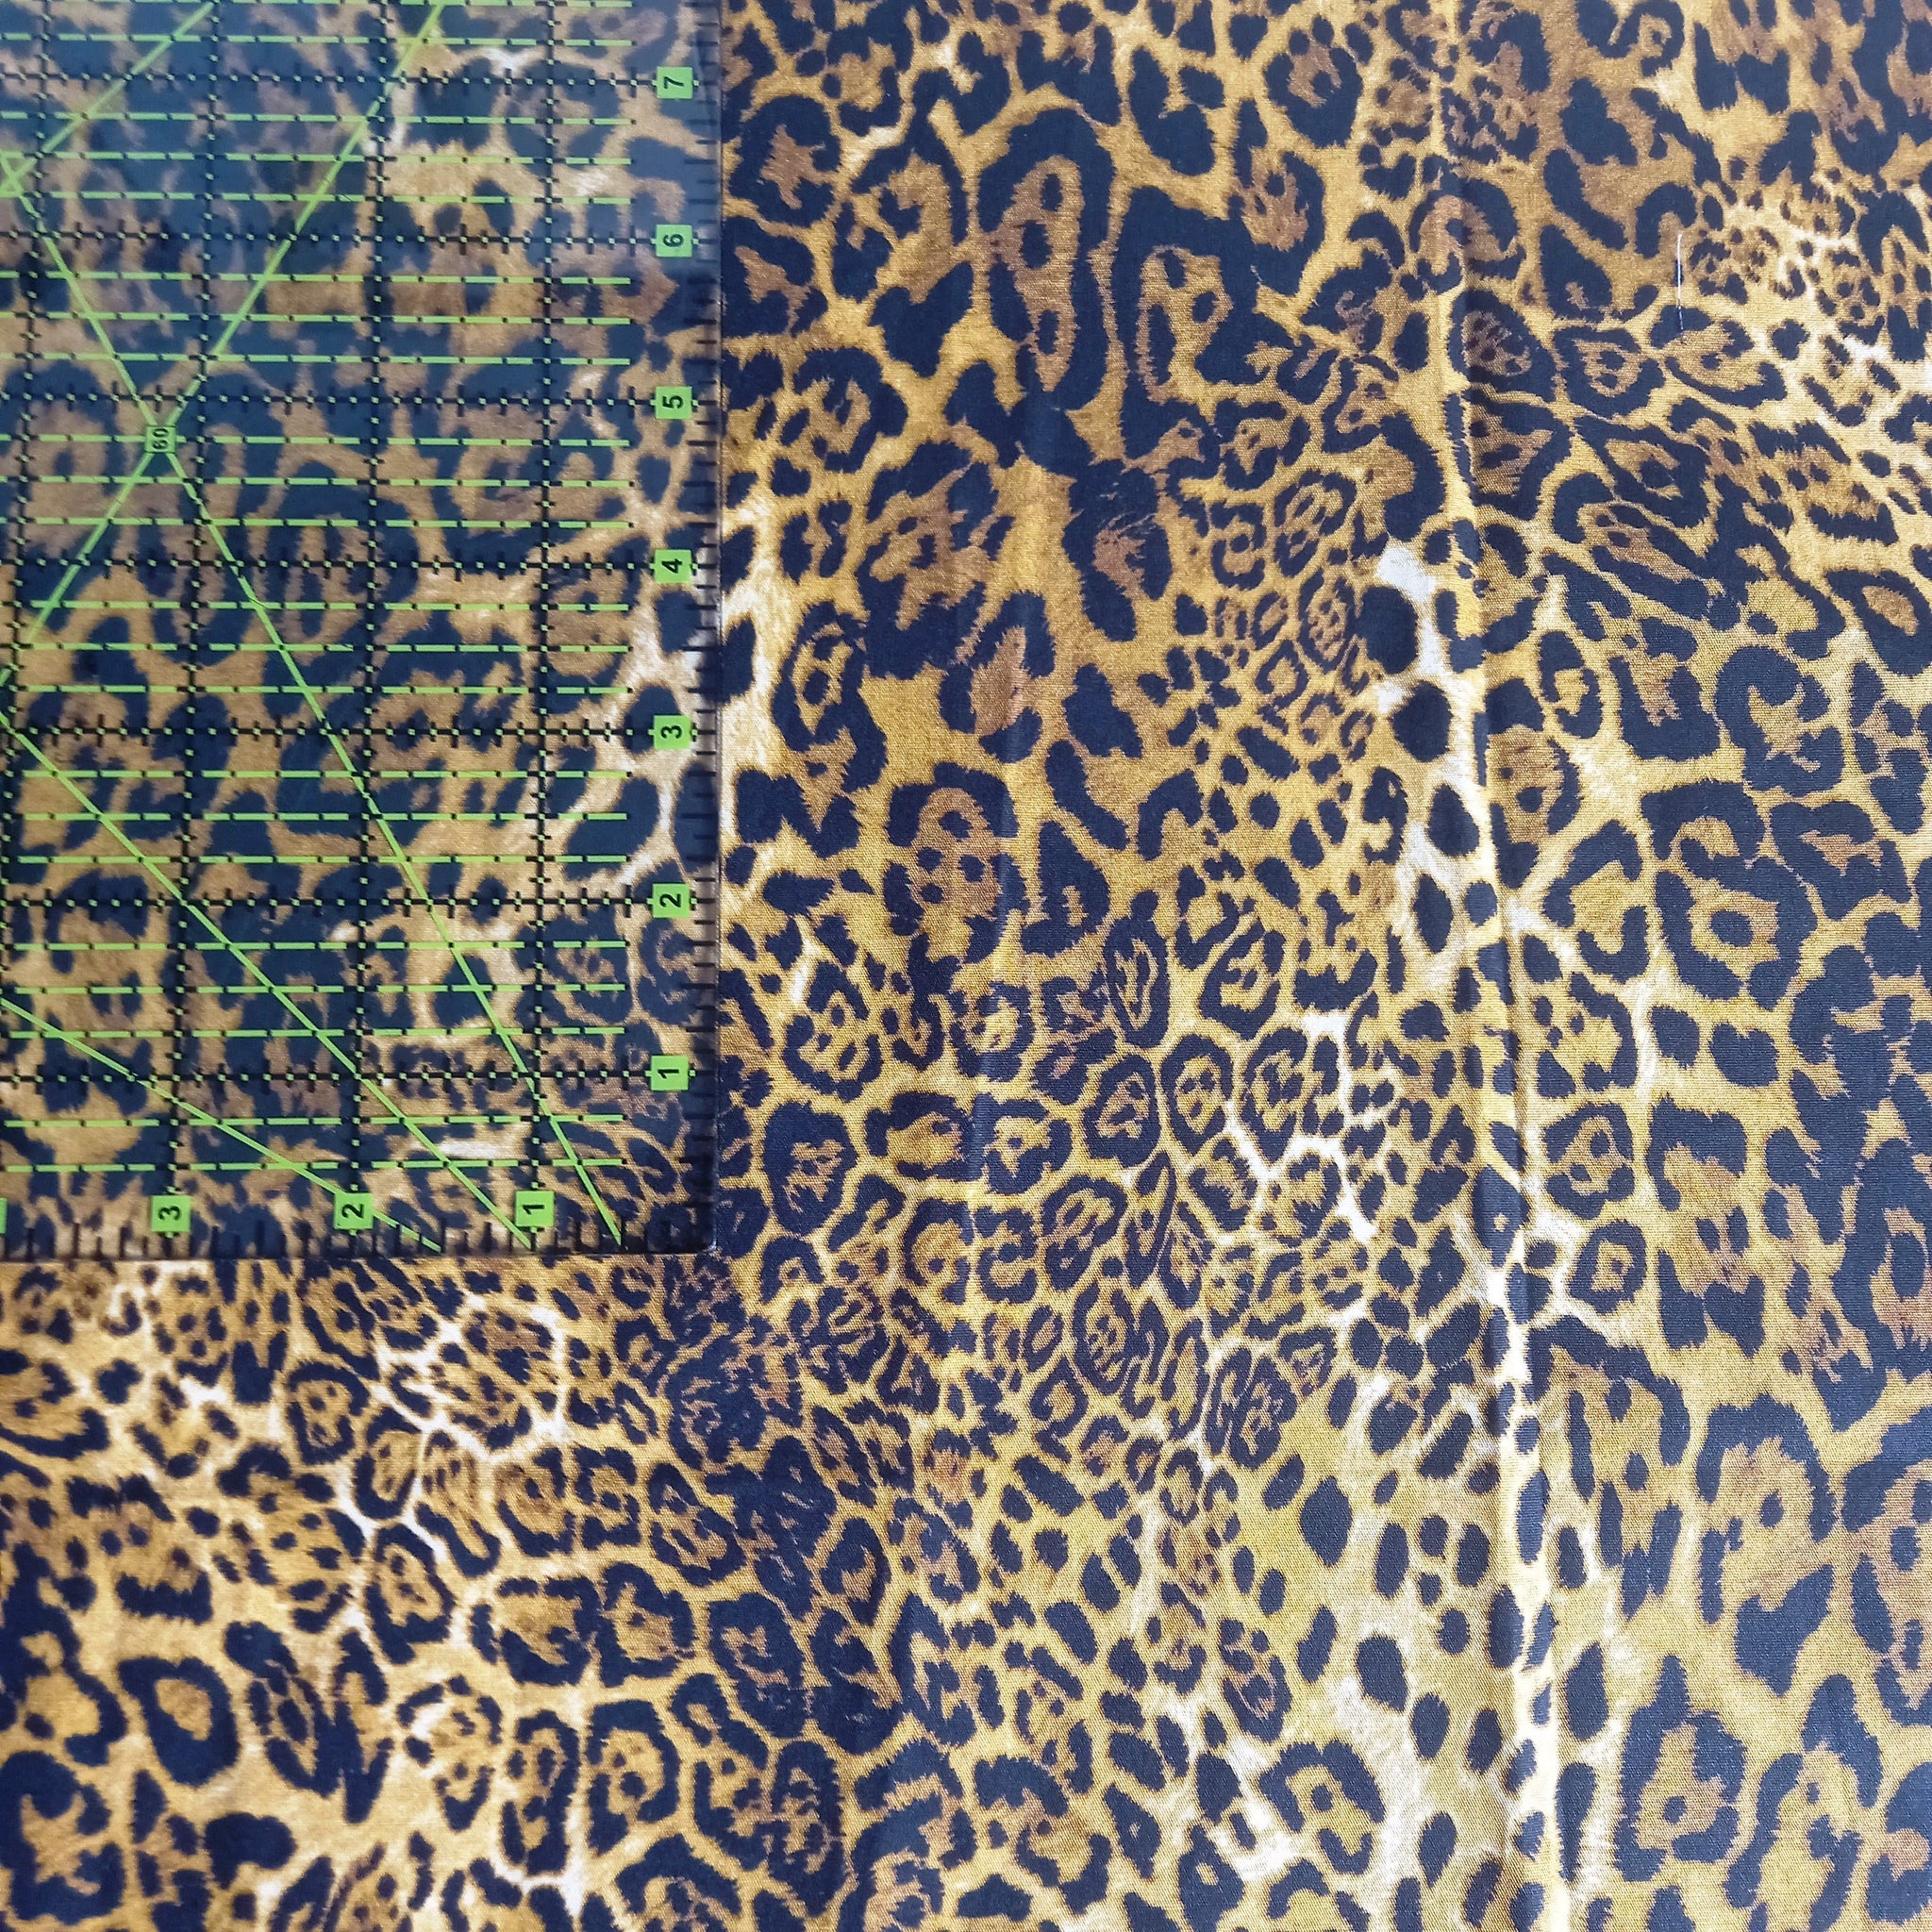 100% Cotton Fabric With Leopard Print